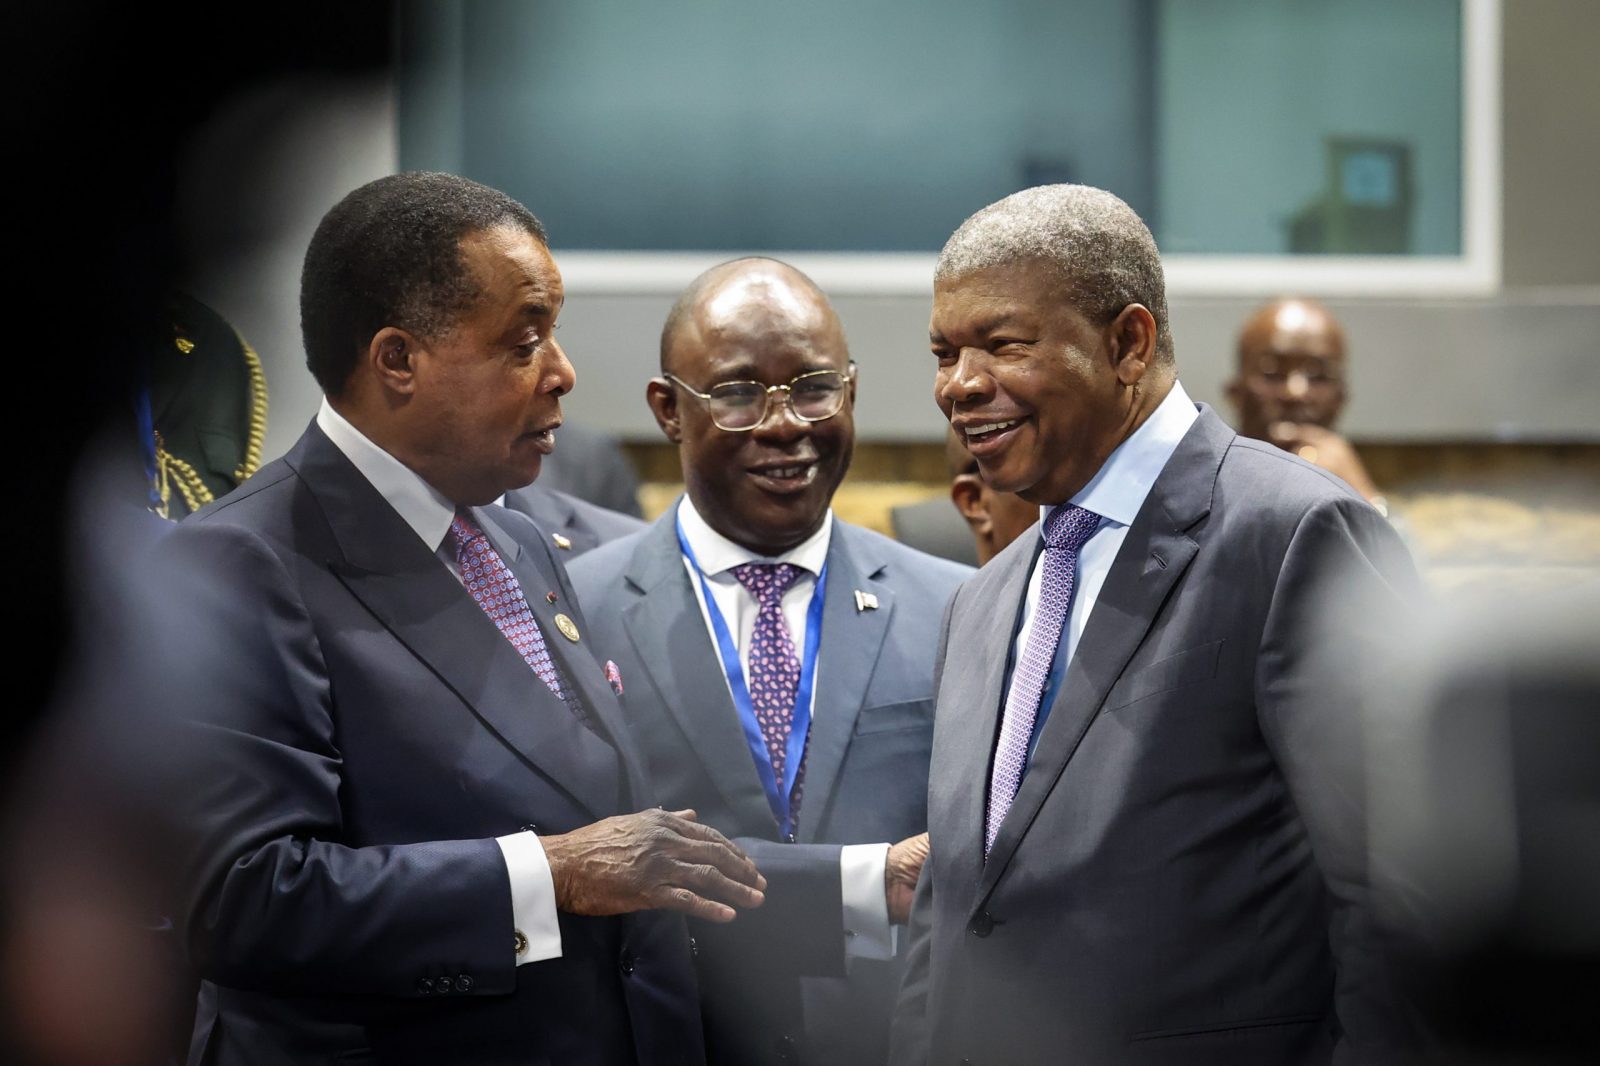 epa10473165 Angola's President Joao Lourenco (R) speaks with the Republic of the Congo President Denis Sassou Nguesso (L) at the start of the African Union Summit in Addis Ababa, Ethiopia, 17 February 2023. The African Union Summit runs until 19 February.  EPA/JOSE SENA GOULAO